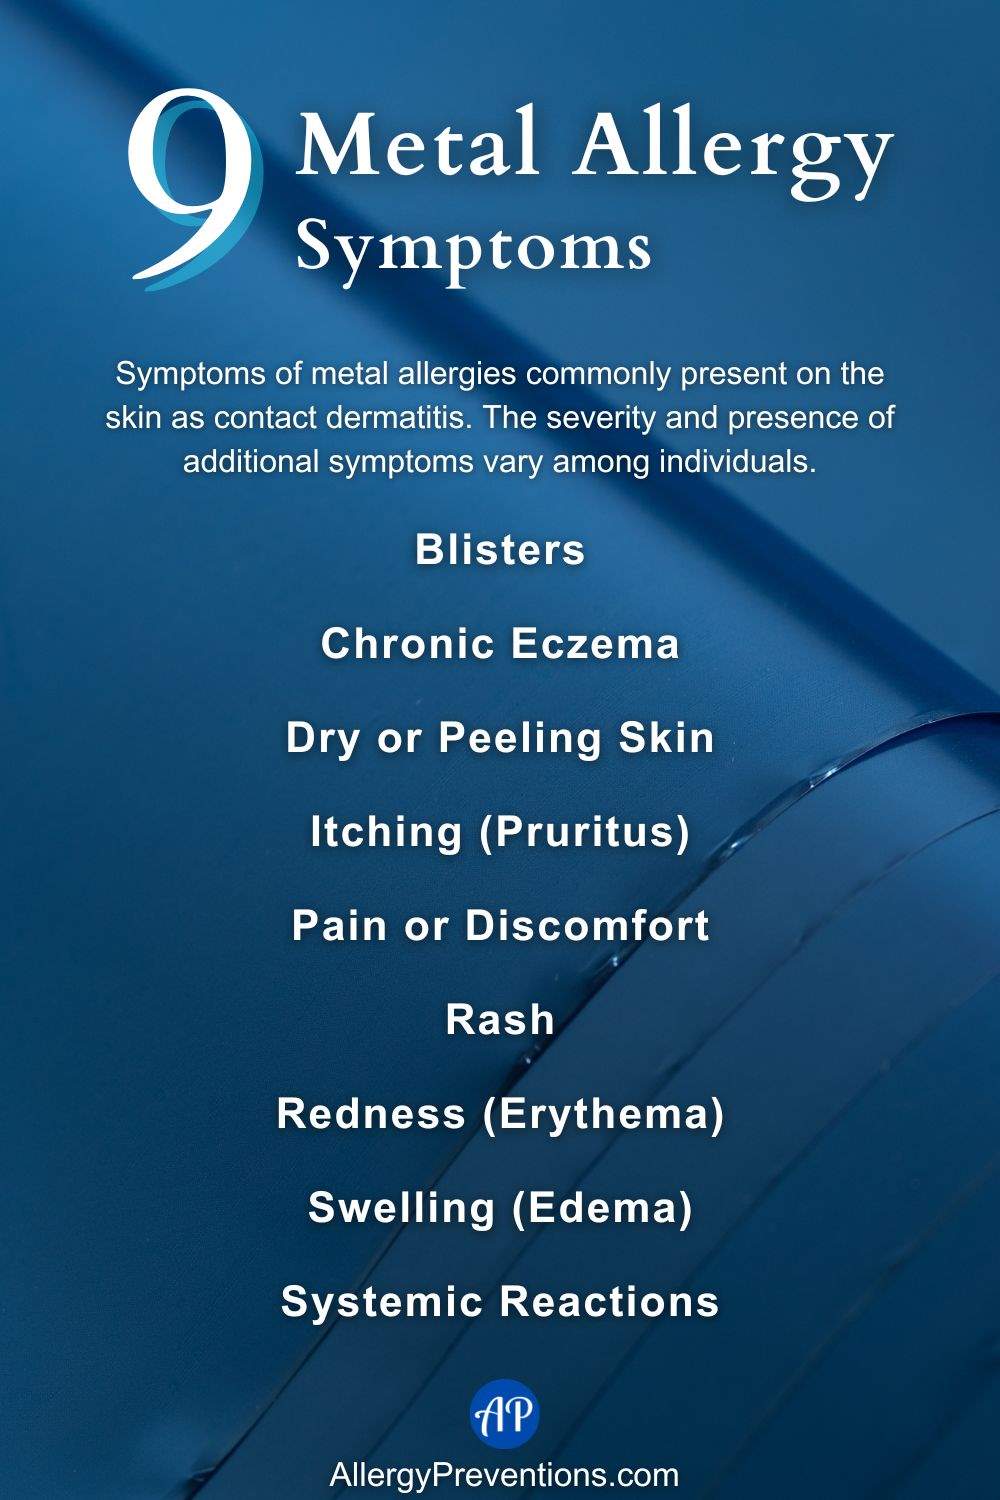 Metal allergy symptoms infographic. Symptoms of metal allergies commonly present on the skin as contact dermatitis. The severity and presence of additional symptoms vary among individuals. List of potential symptoms: Blisters, Chronic Eczema, Dry or Peeling Skin, Itching (Pruritus), Pain or Discomfort, Rash, Redness (Erythema), Swelling (Edema), and Systemic Reactions.